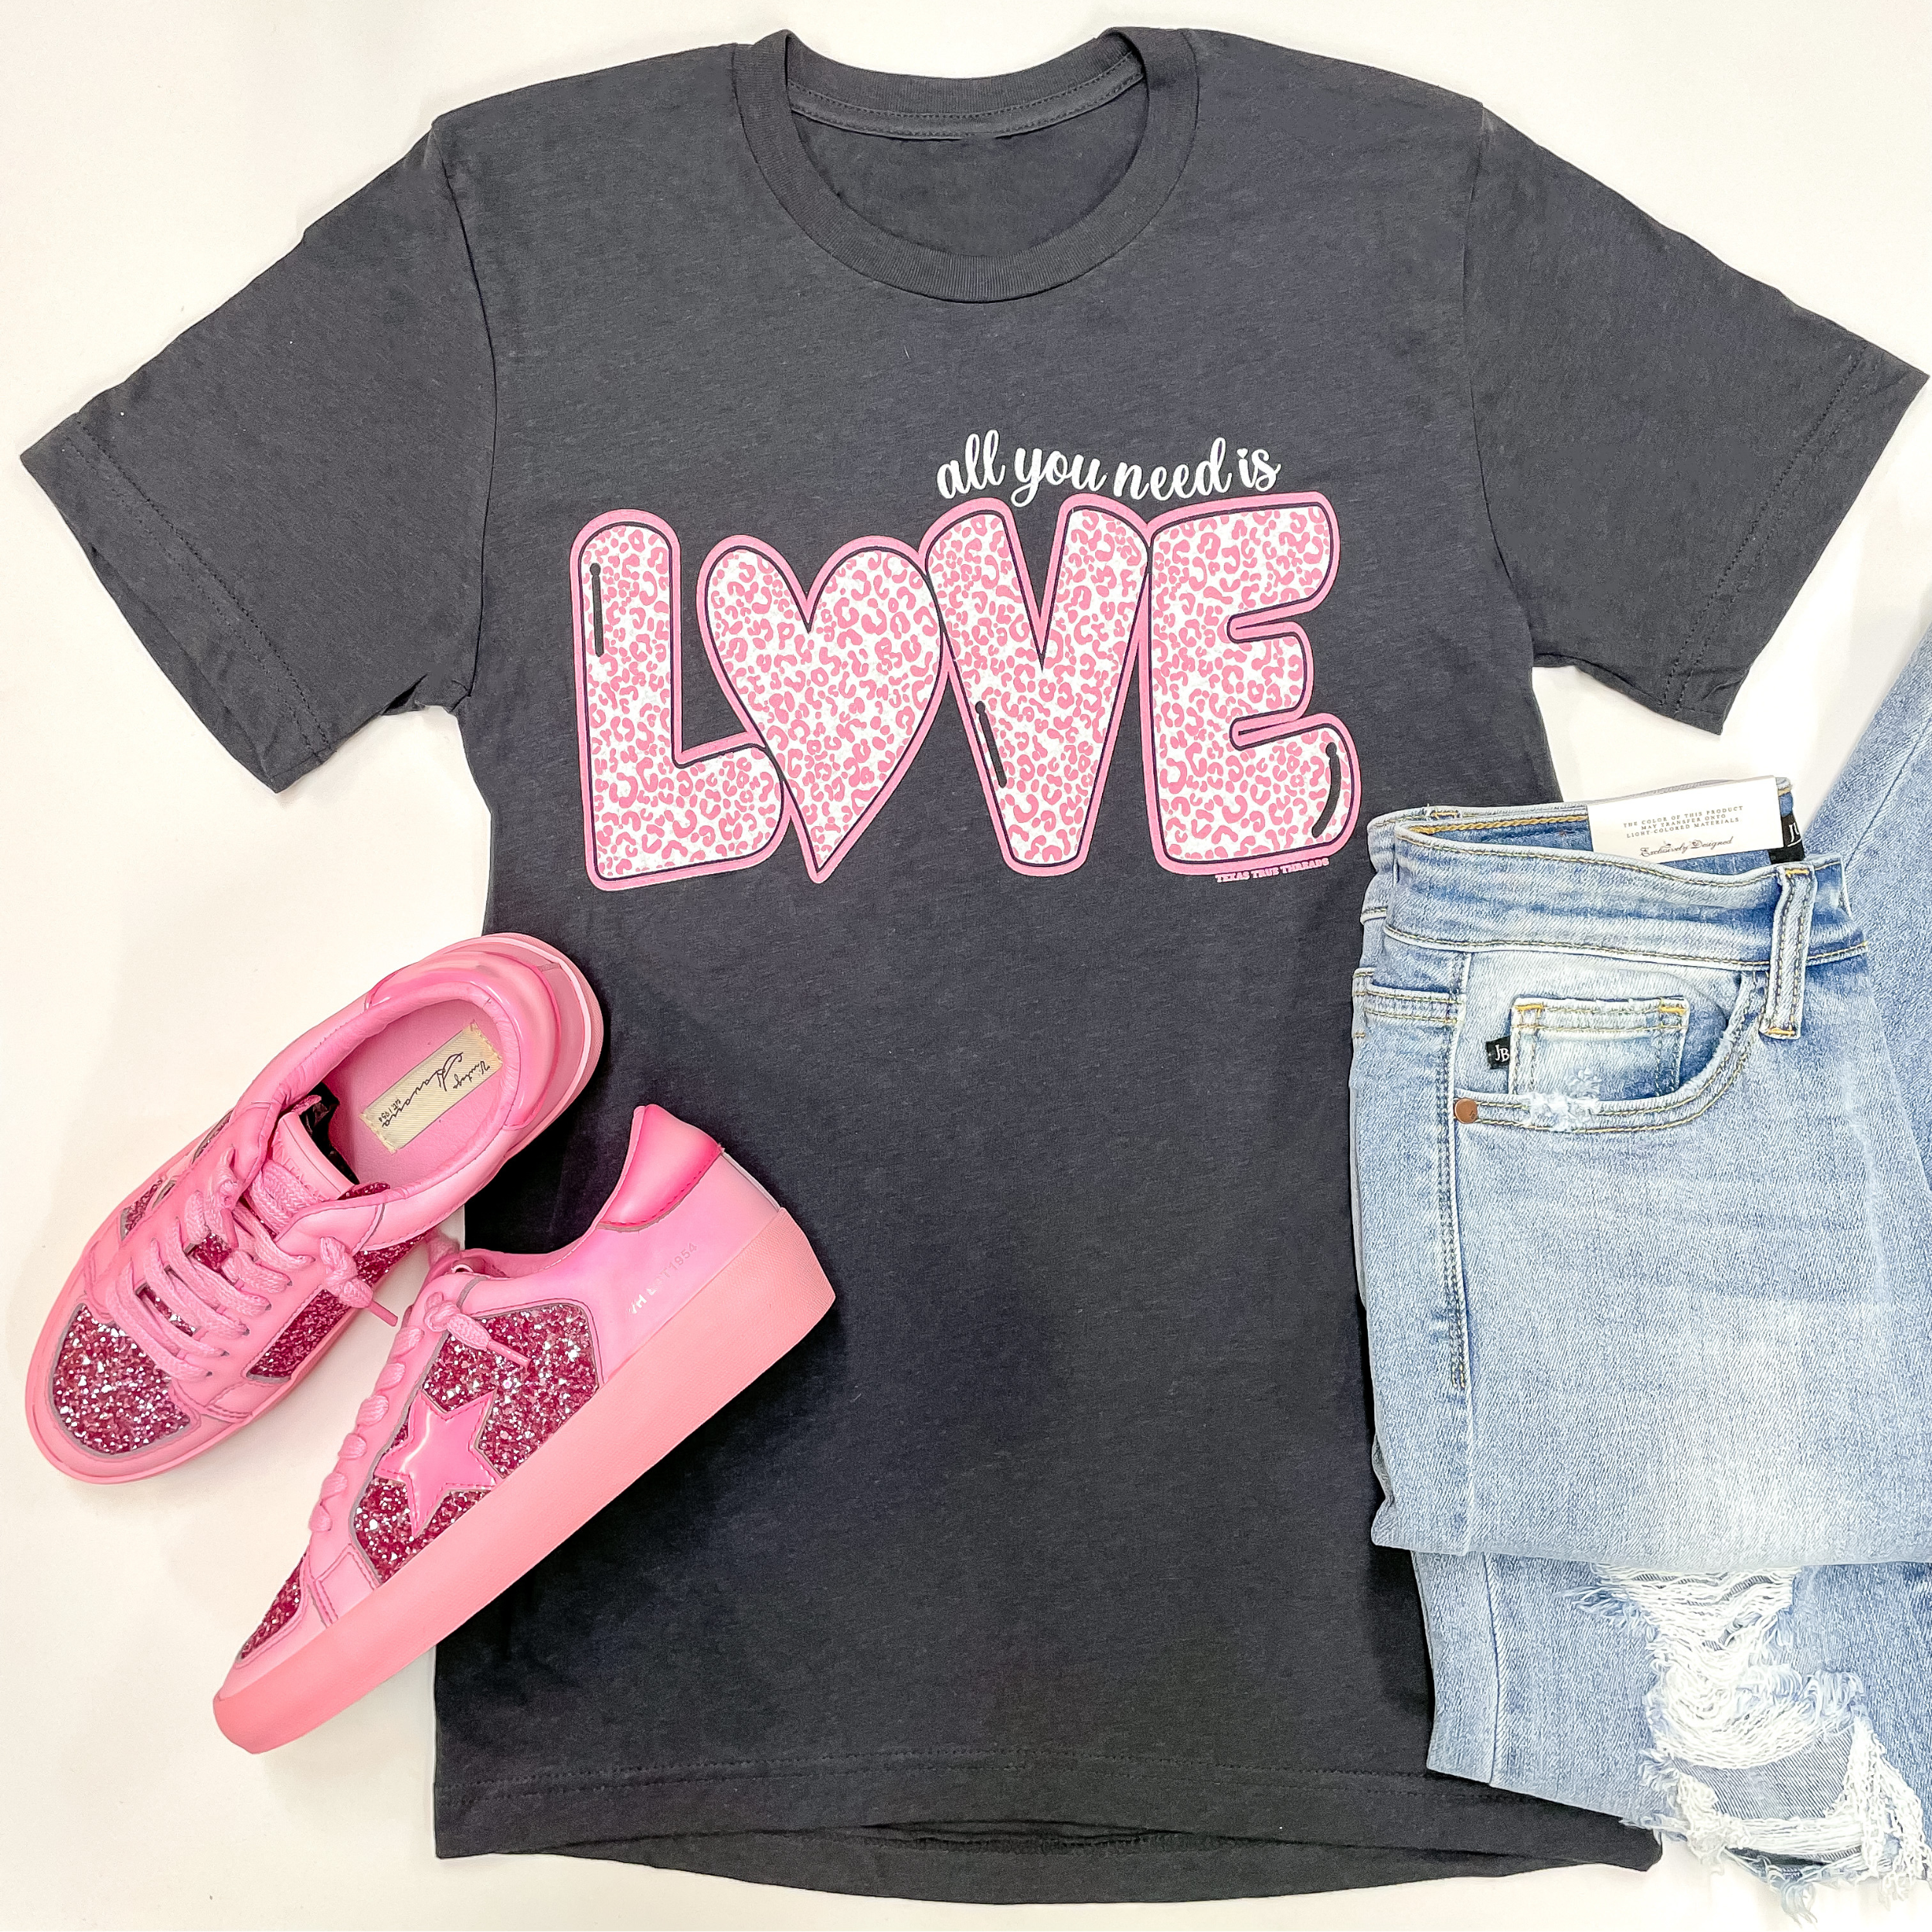 A charcoal grey short sleeve tee shirt with a graphic that says "All you need is love" in light pink leopard print. This tee is pictured on a white background with distressed jeans and hot pink sneakers to match.